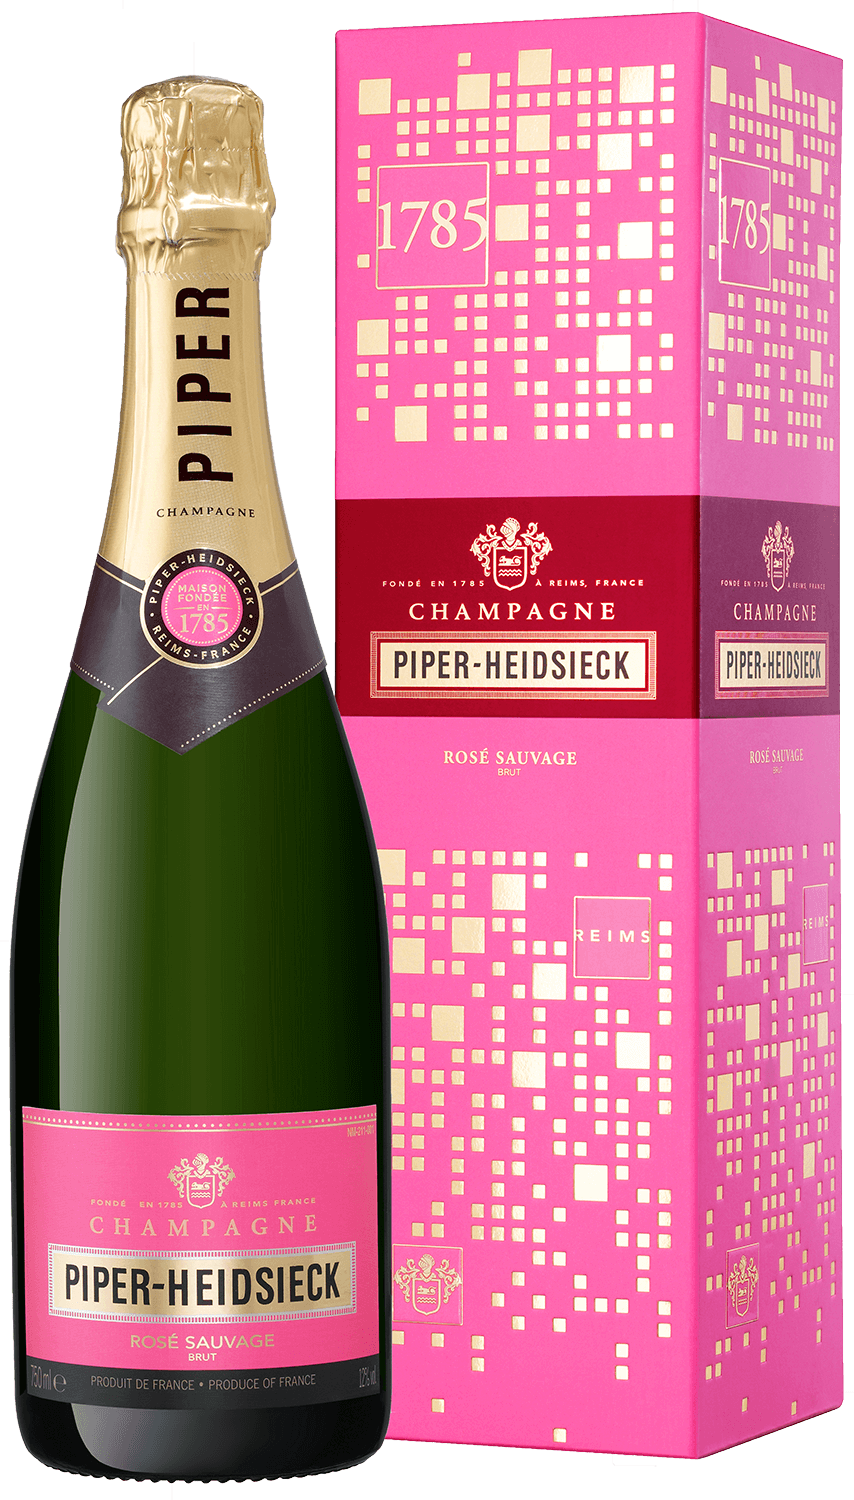 Piper-Heidsieck Sauvage Rose Brut Champagne AOC (gift box) piper heidsieck year of the tiger brut champagne aoc gift box